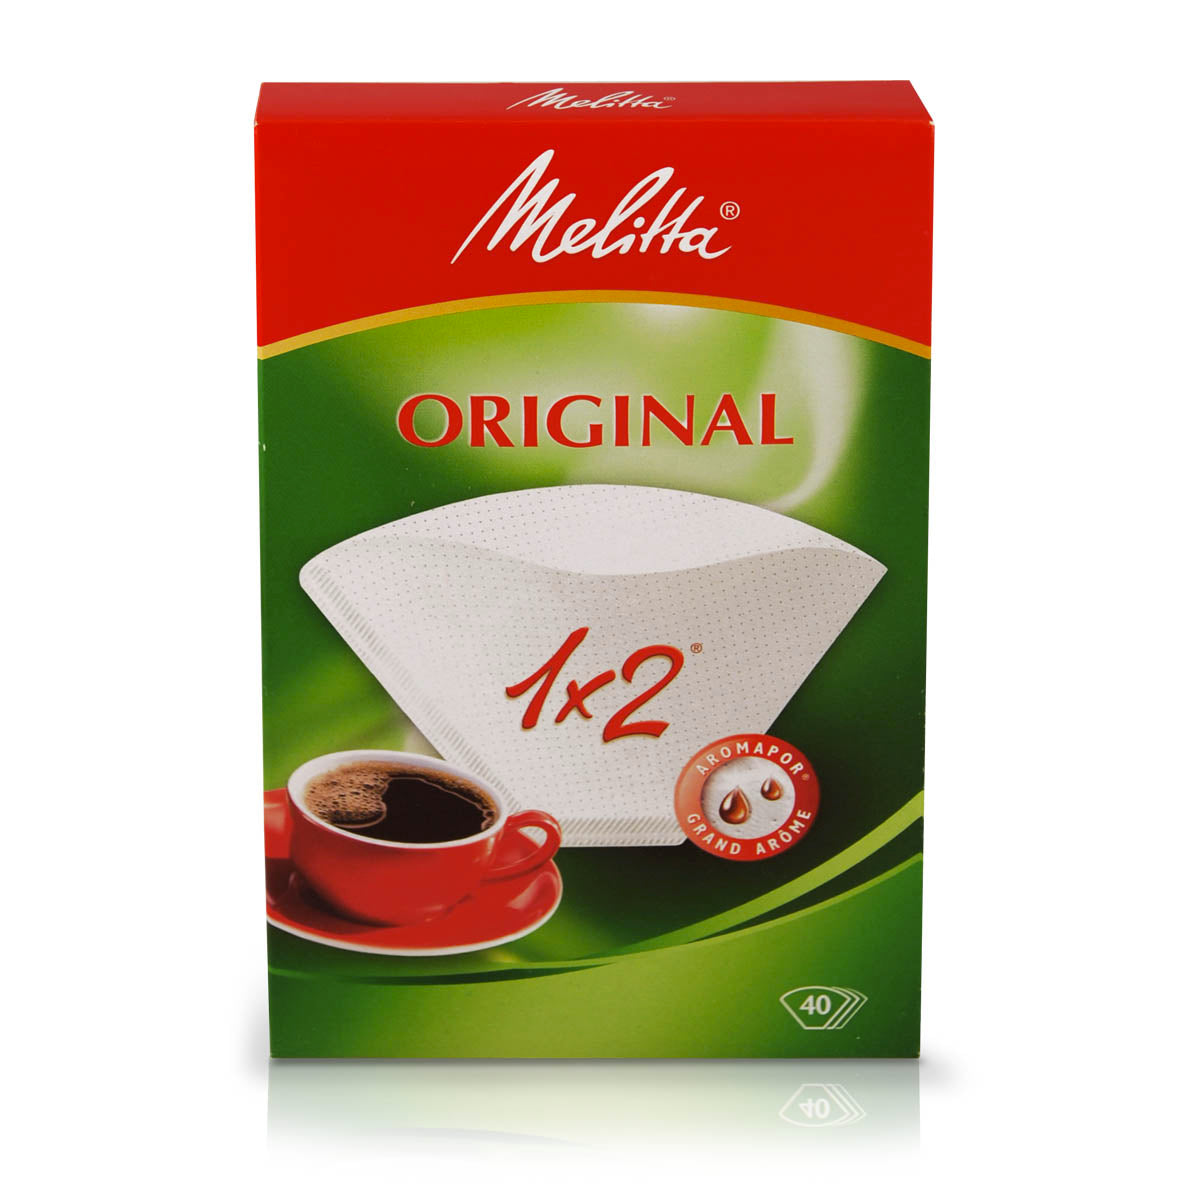 Pack containing 40 Melitta paper filters 1x2 cups